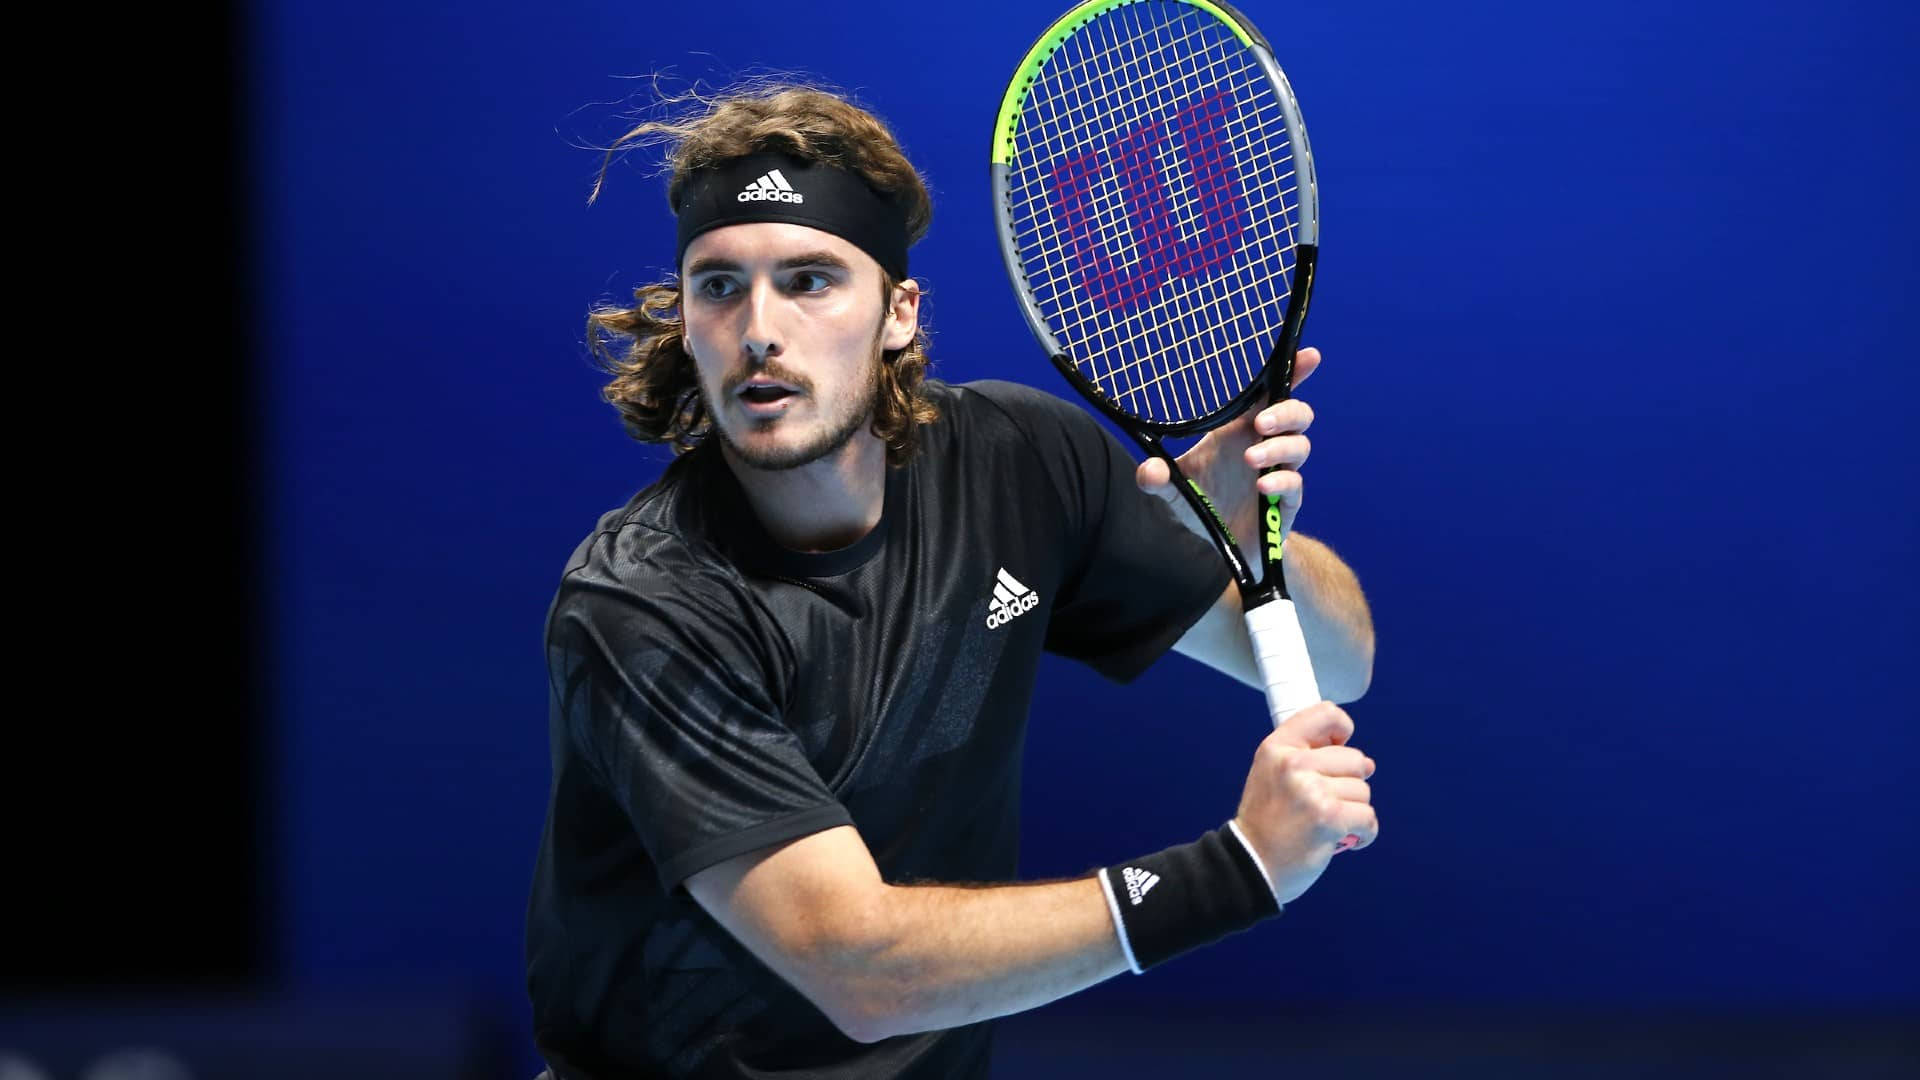 Tennis Star Stefanos Tsitsipas With Racket In Action